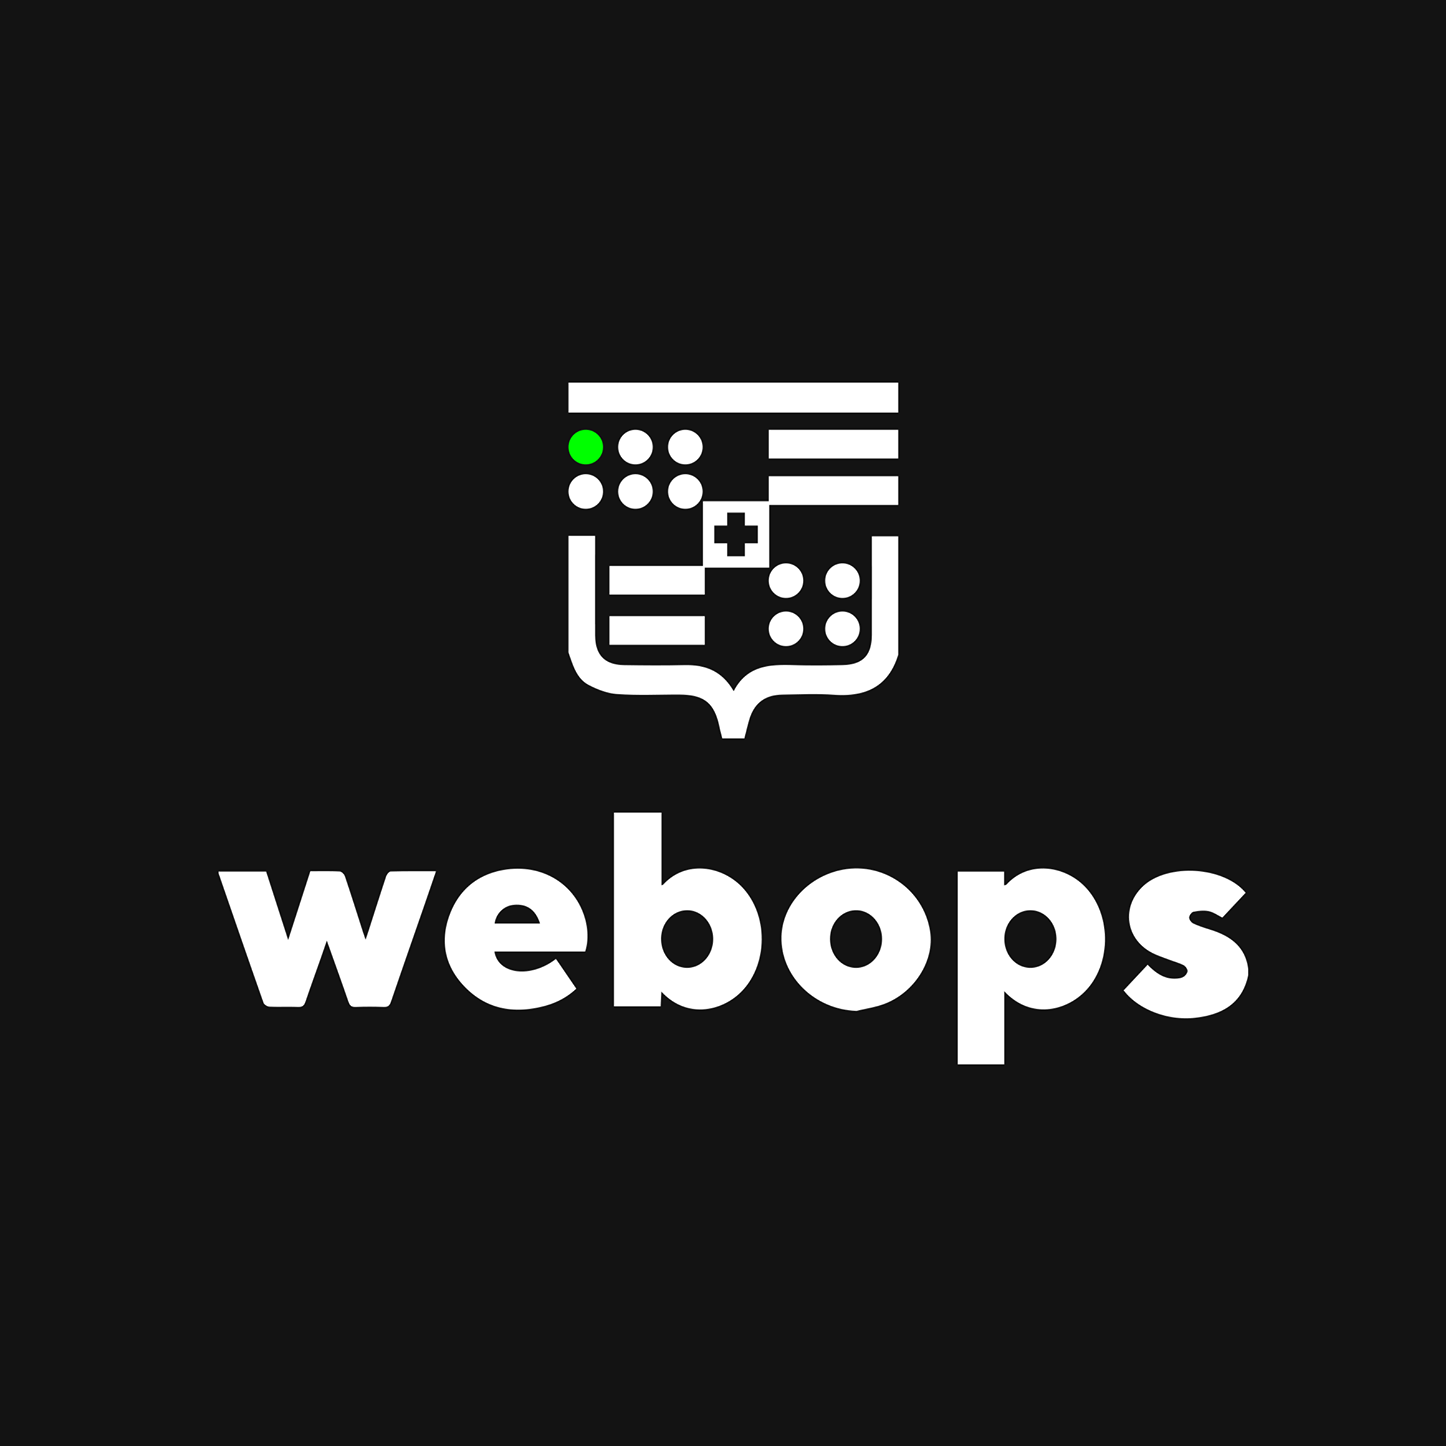 The Webops